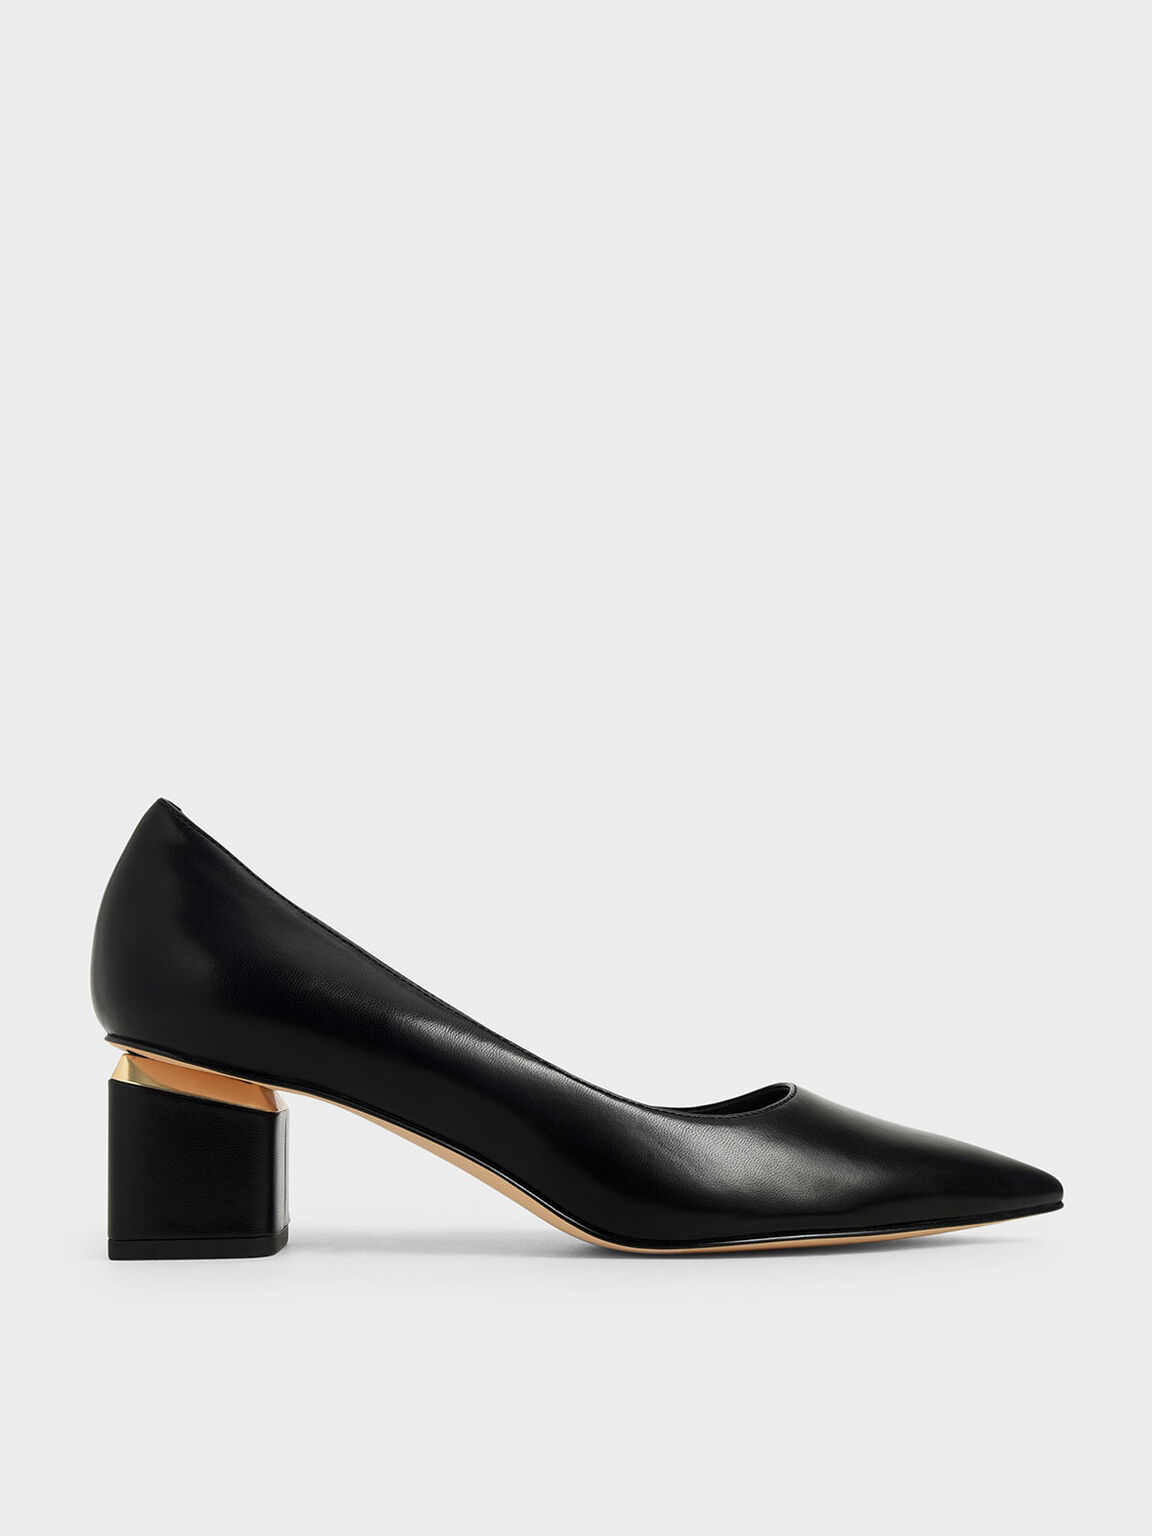 Metal Accented Pointed Toe Pumps, Black, hi-res